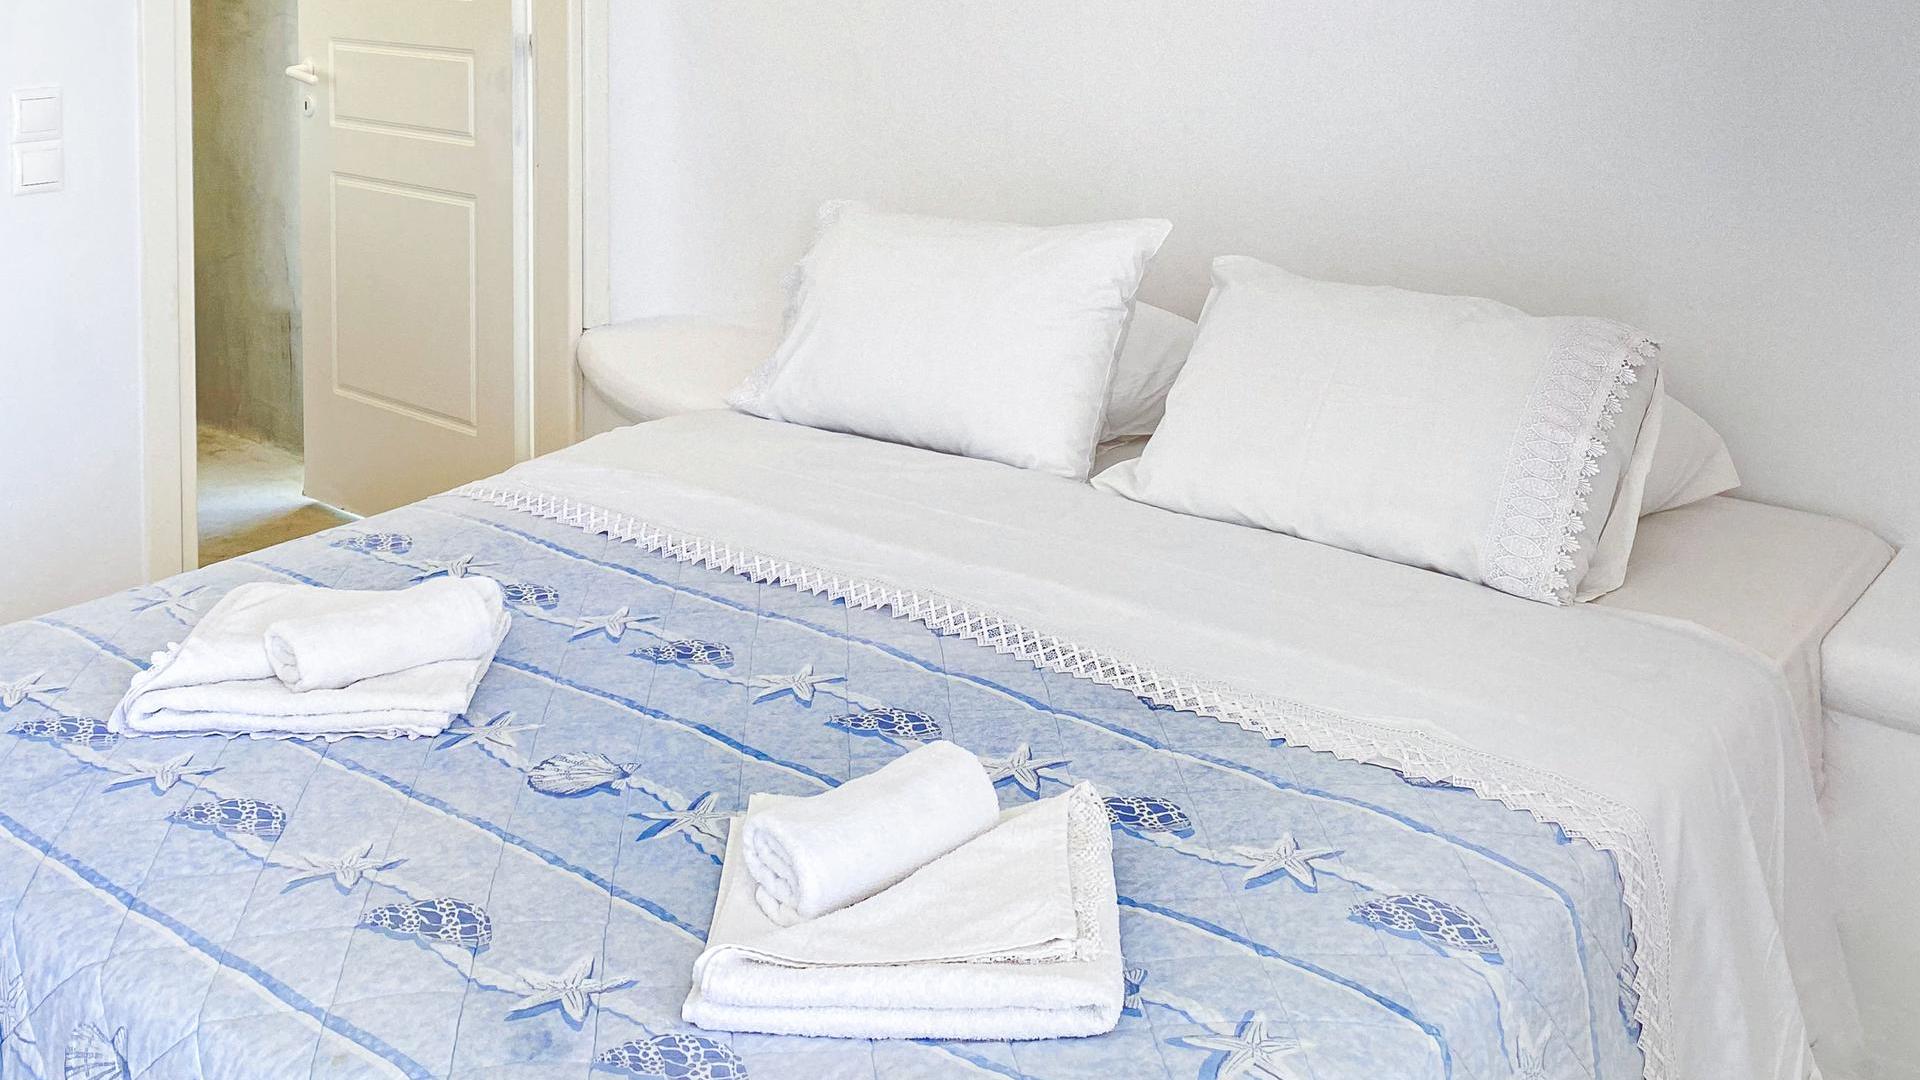 Blue Harmony Suites of Mykonos – Deluxe Suite for 2 guests